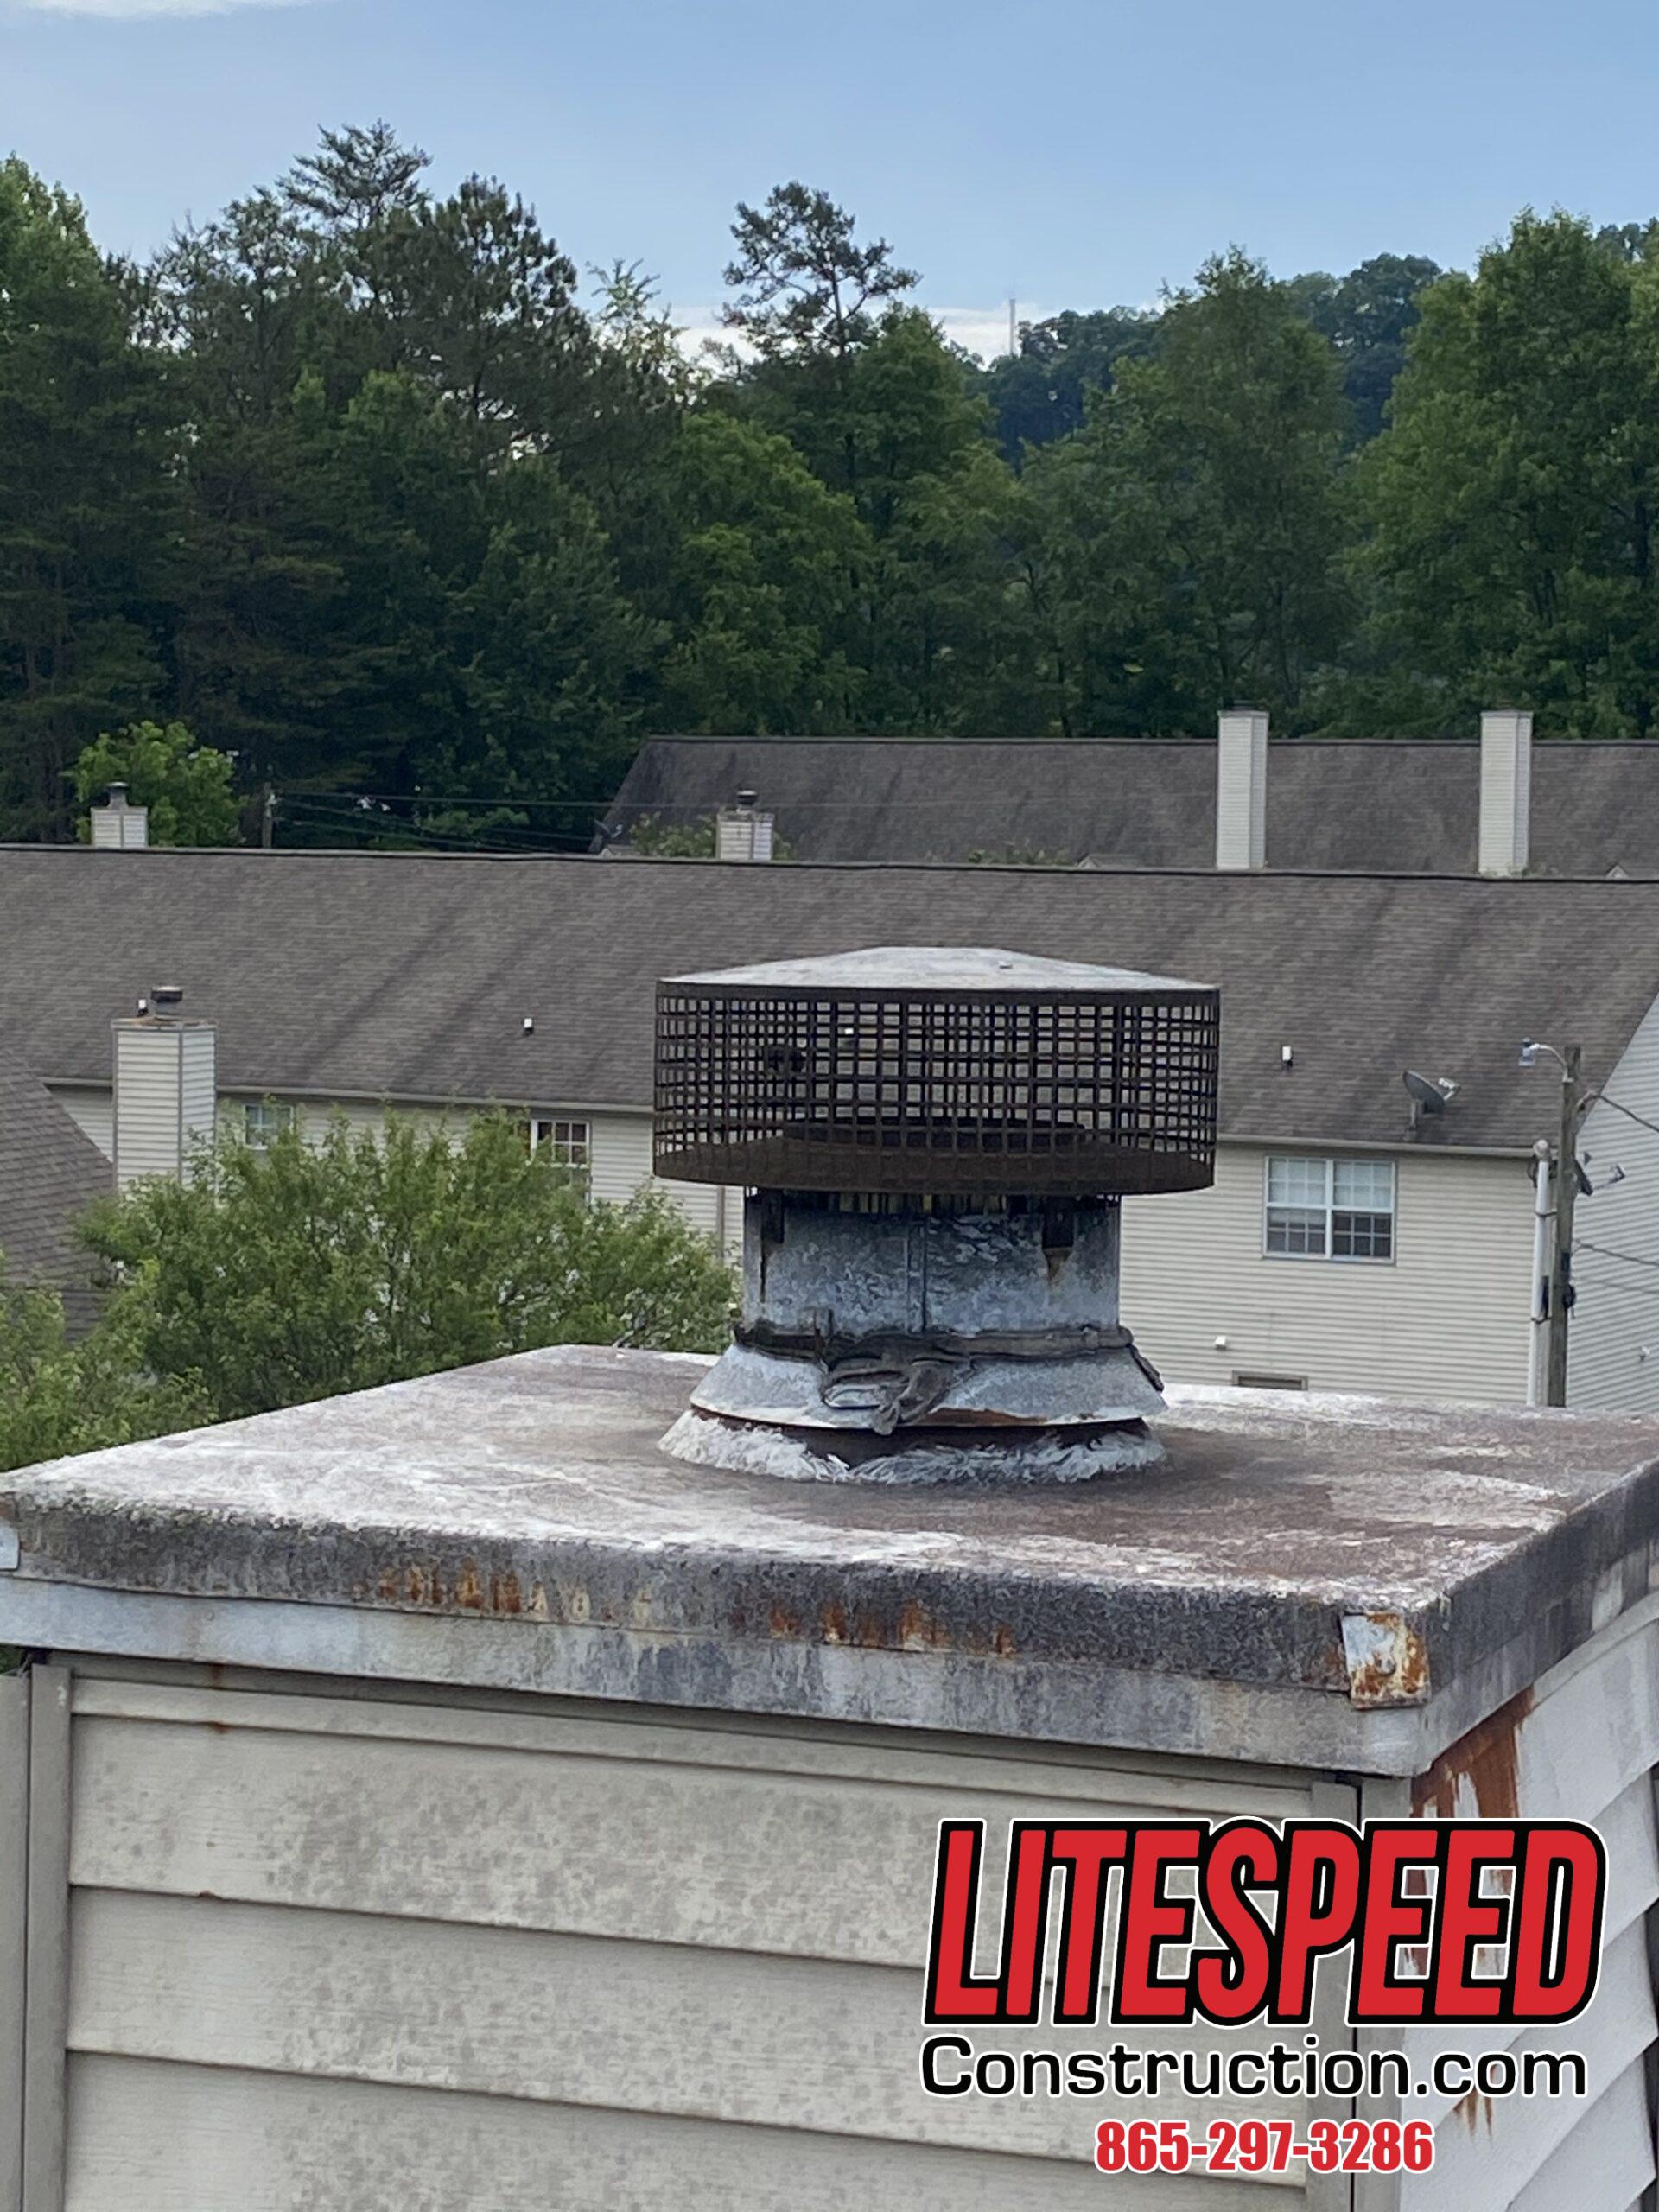 This is a picture of an old rusty chimney cap on a steep roof